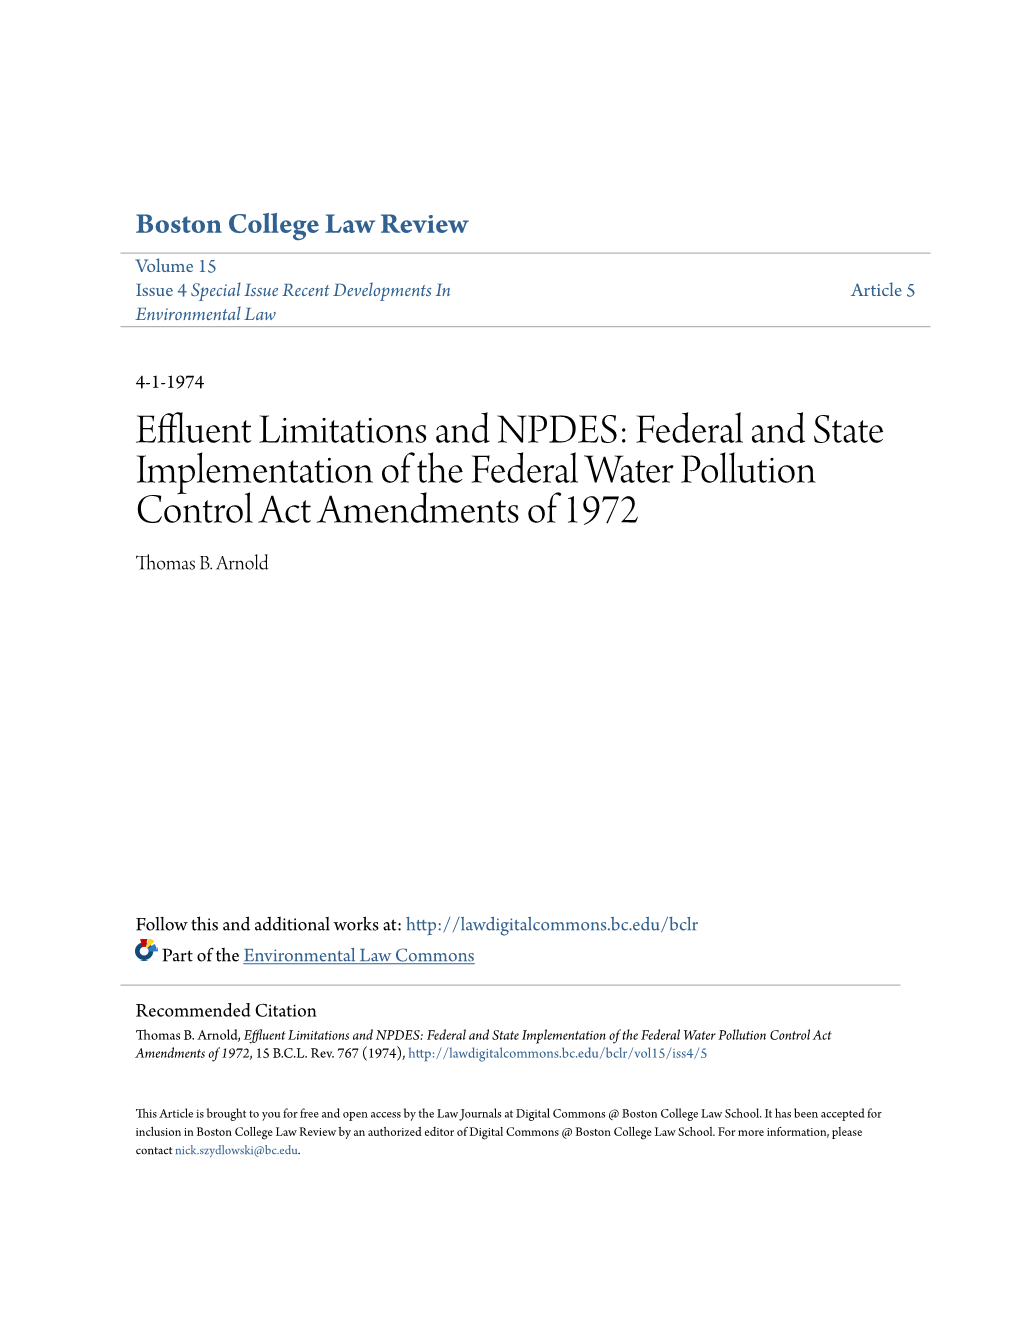 Effluent Limitations and NPDES: Federal and State Implementation of the Federal Water Pollution Control Act Amendments of 1972 Thomas B